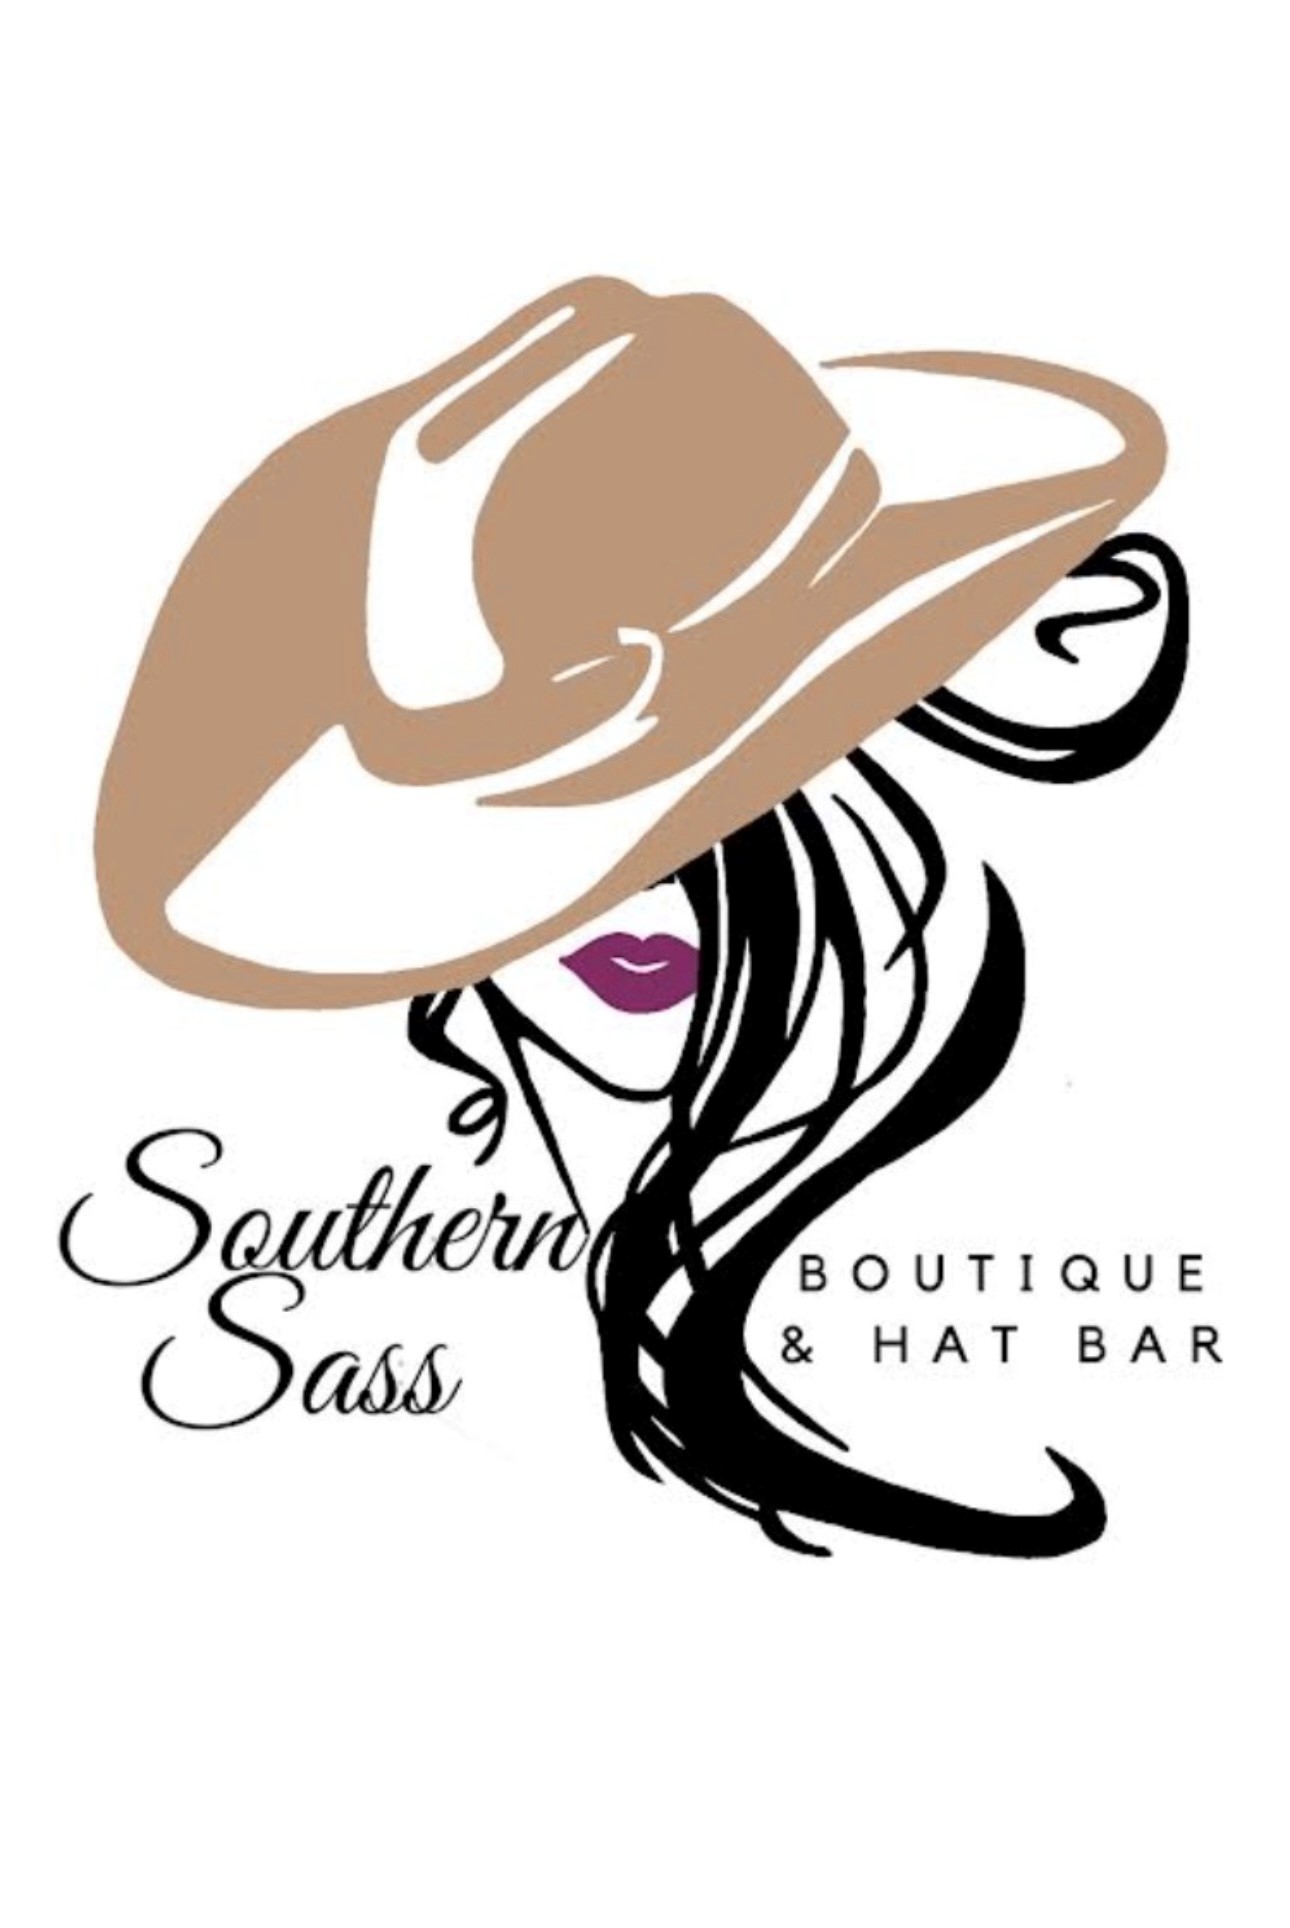 Southern Sass Boutique & Hat Bar